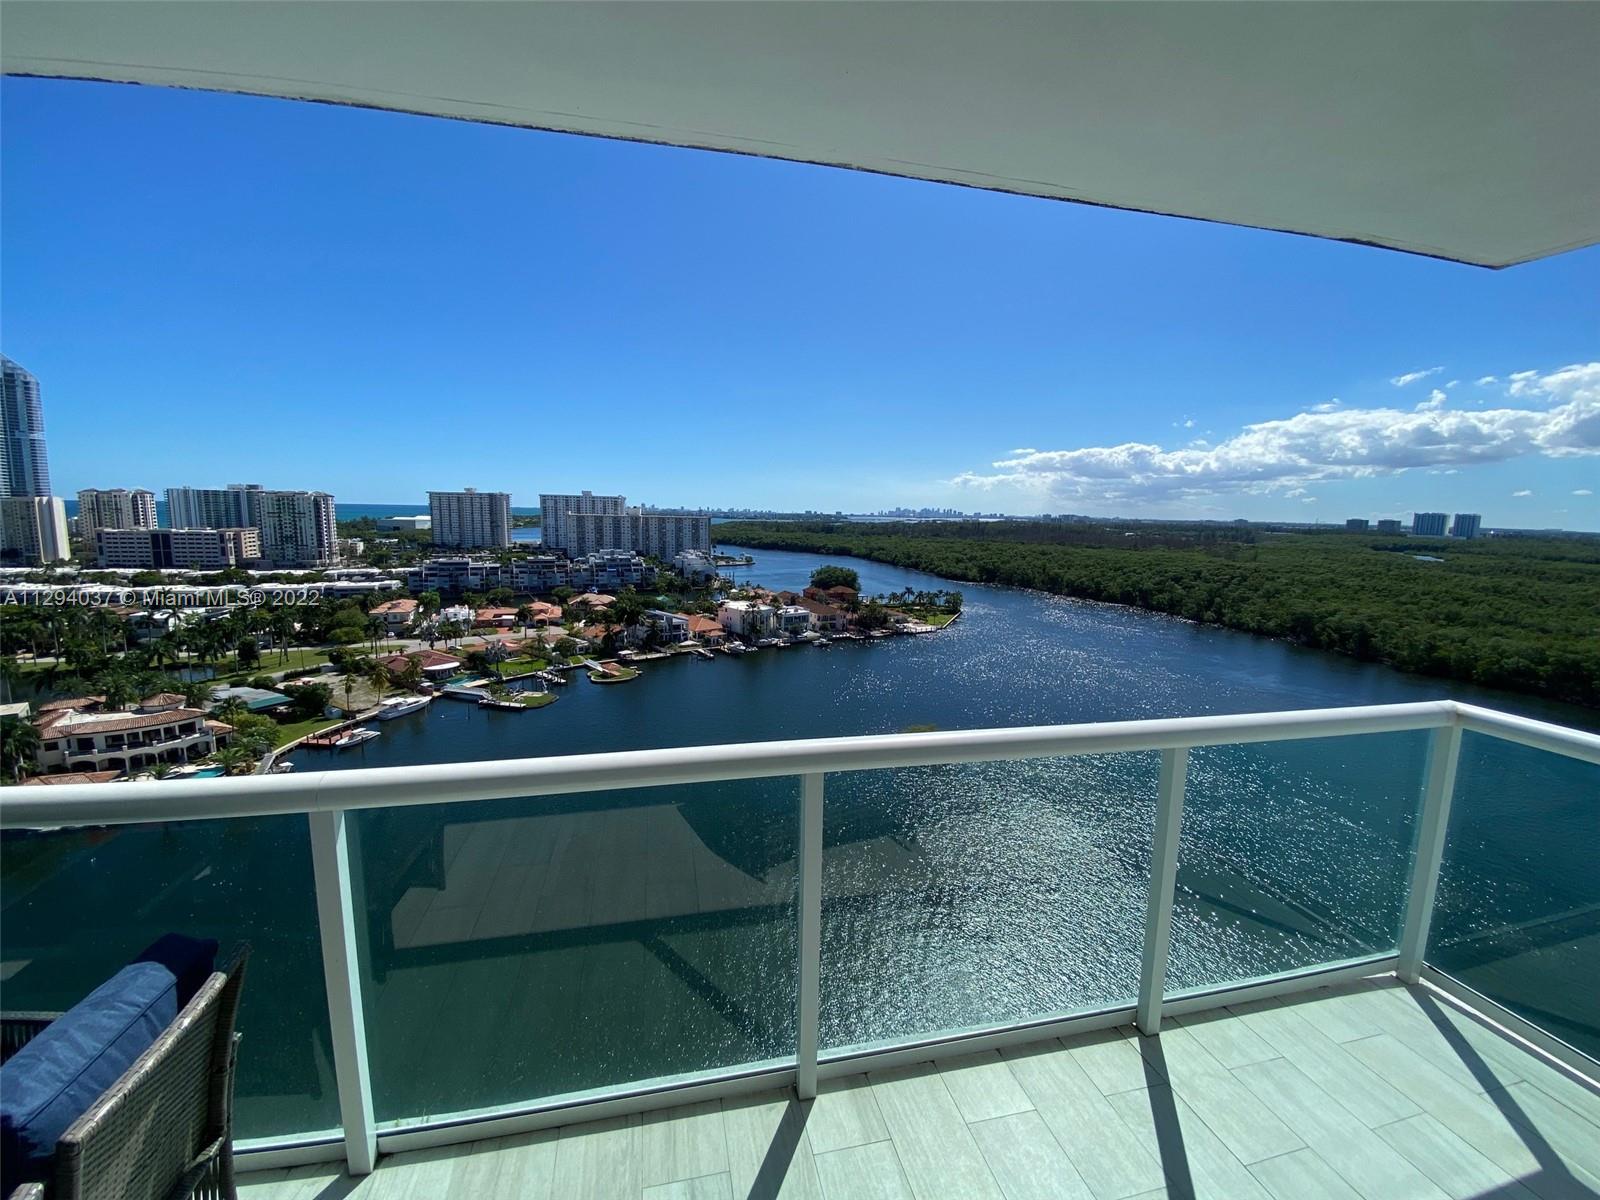 Amazing views from this high floor 3 bedrooms, 3 Baths. White large porcelain tiles. Flow through corner unit. These were the most sought after units in the building with views in all bedrooms, kitchen and living area. The kitchen and living areas have South Intracoastal, park views and partial ocean views. Views will never be blocked. The building is only a block to the beach and it offers some of the best amenities in the area (tennis, spa, massage room, gym, social rooms and a beautiful pool with bar). The unit has one assigned parking space and the building offers valet service. Location is amazing being just minutes to Aventura Mall, Bal Harbour shops and main restaurants in the area. The building is wall to wall with the new Jewish Center which is under construction.